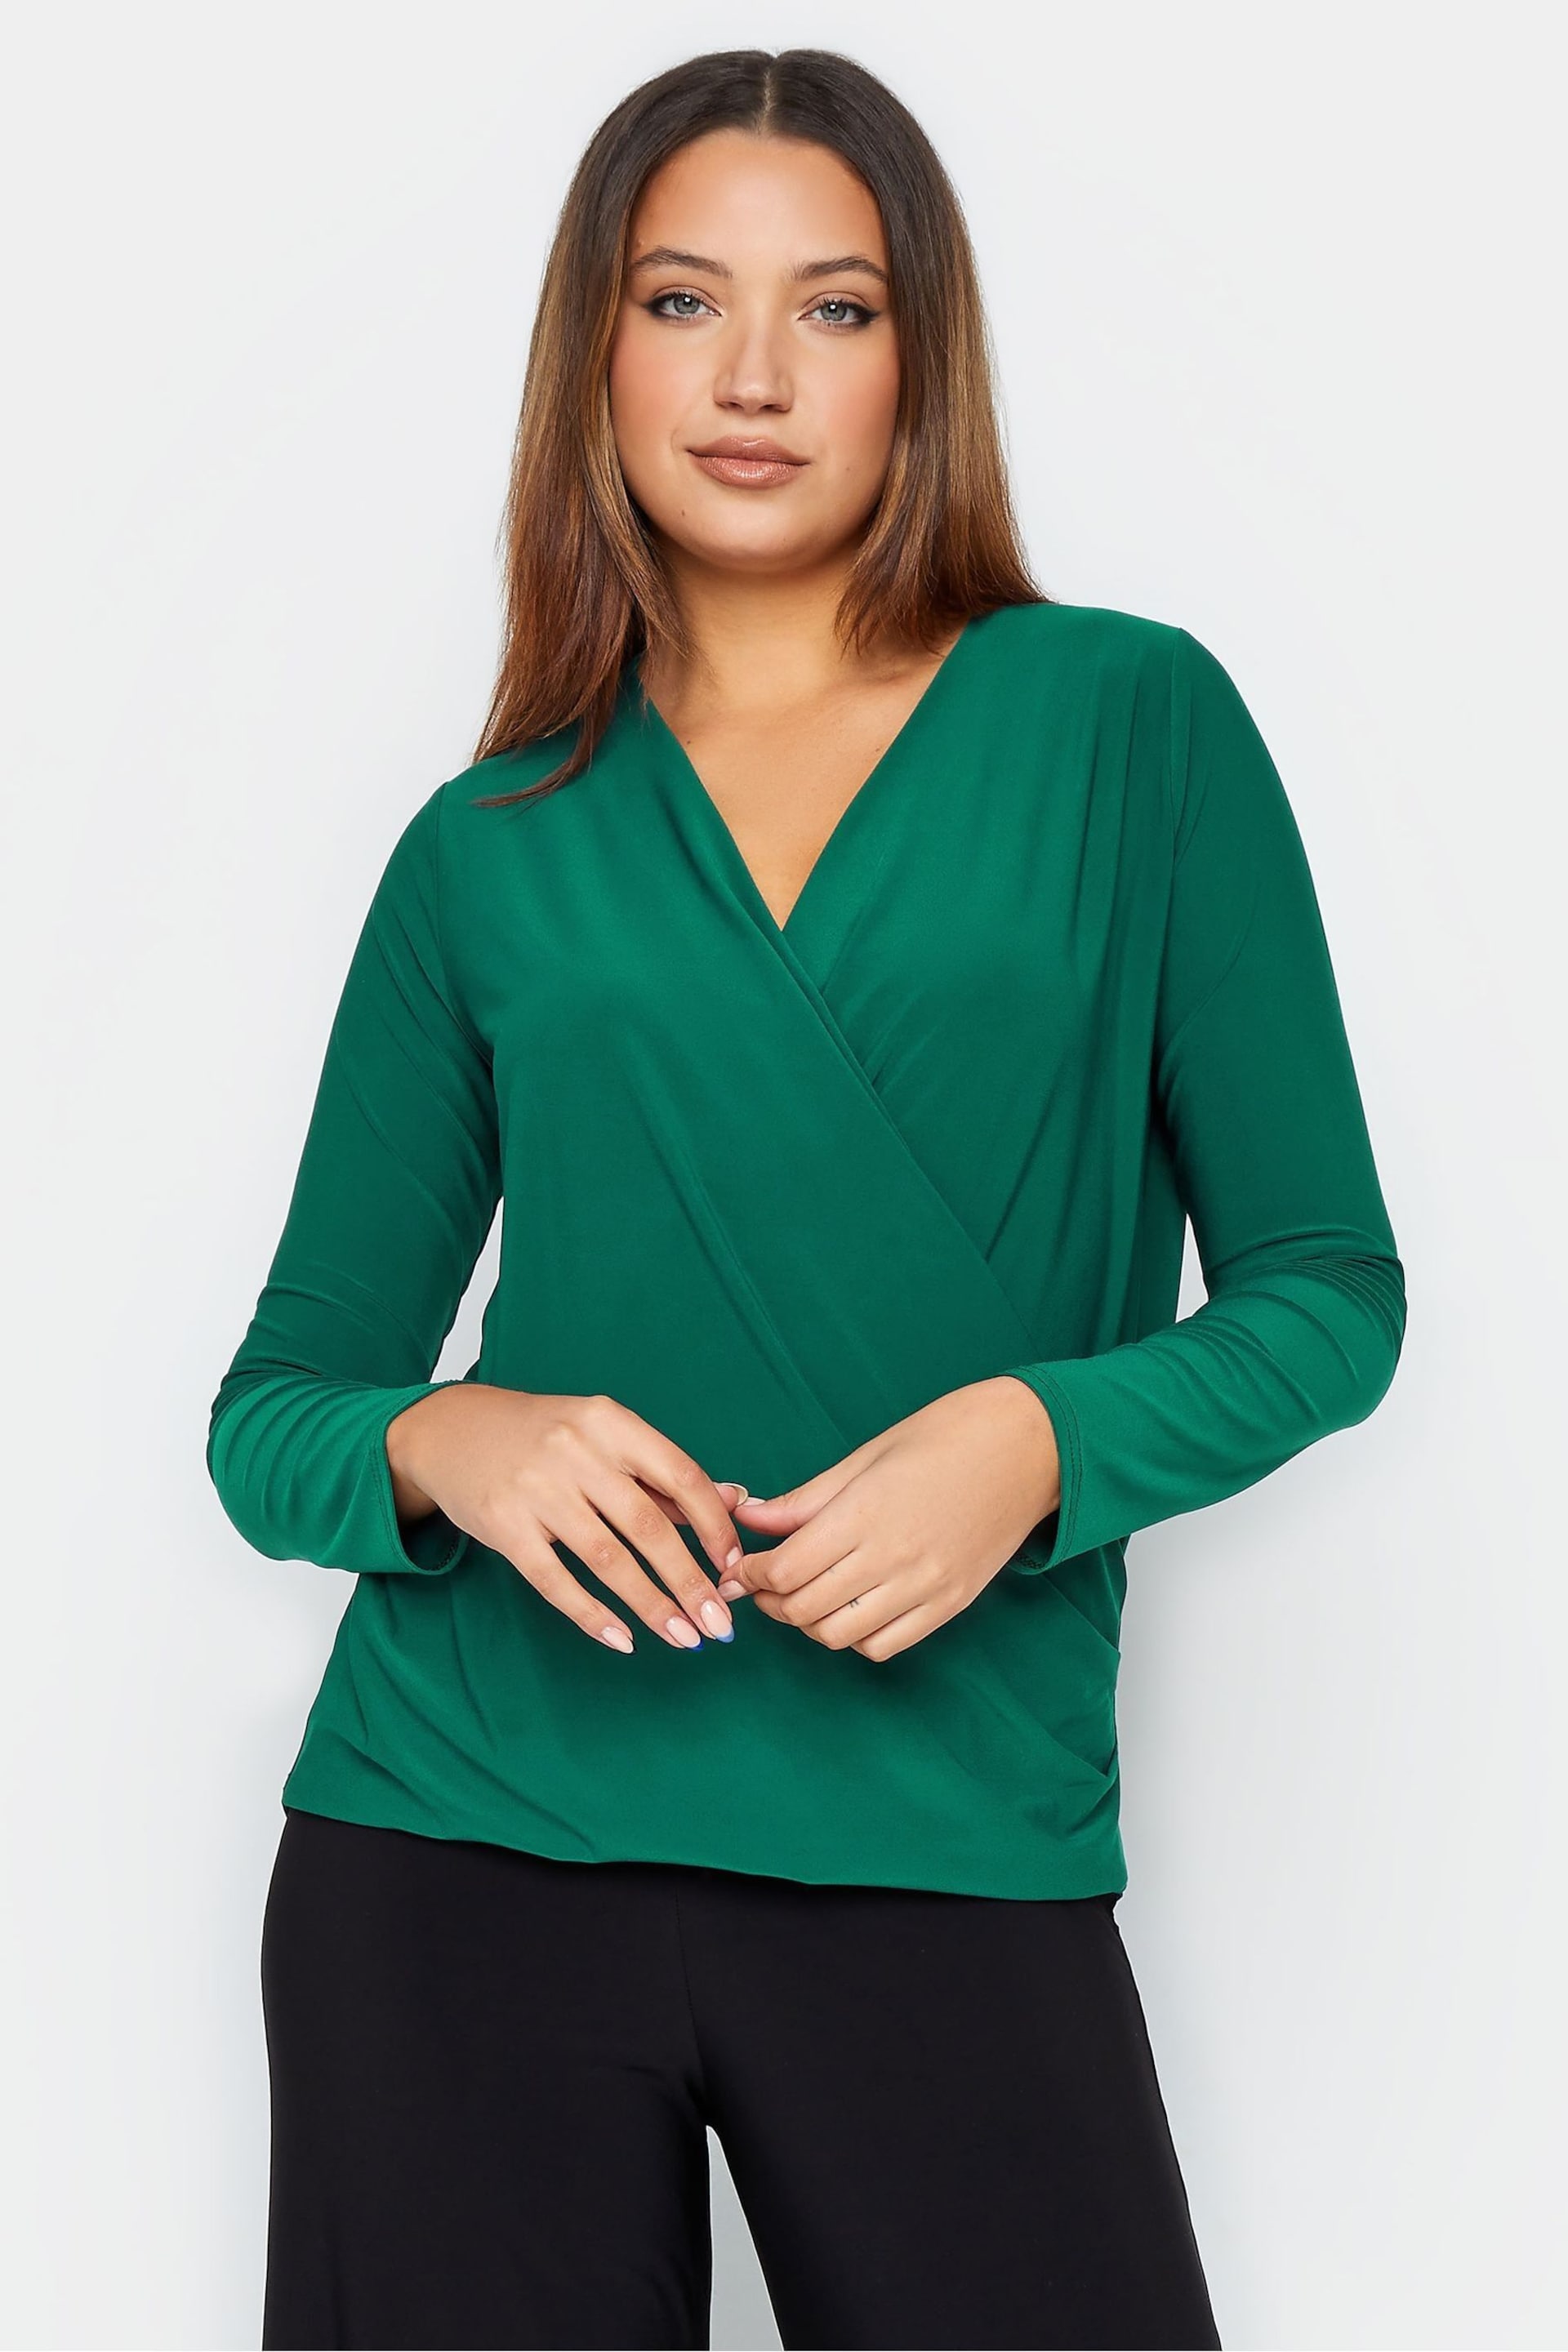 Long Tall Sally Green ITY Wrap Top - Image 1 of 4